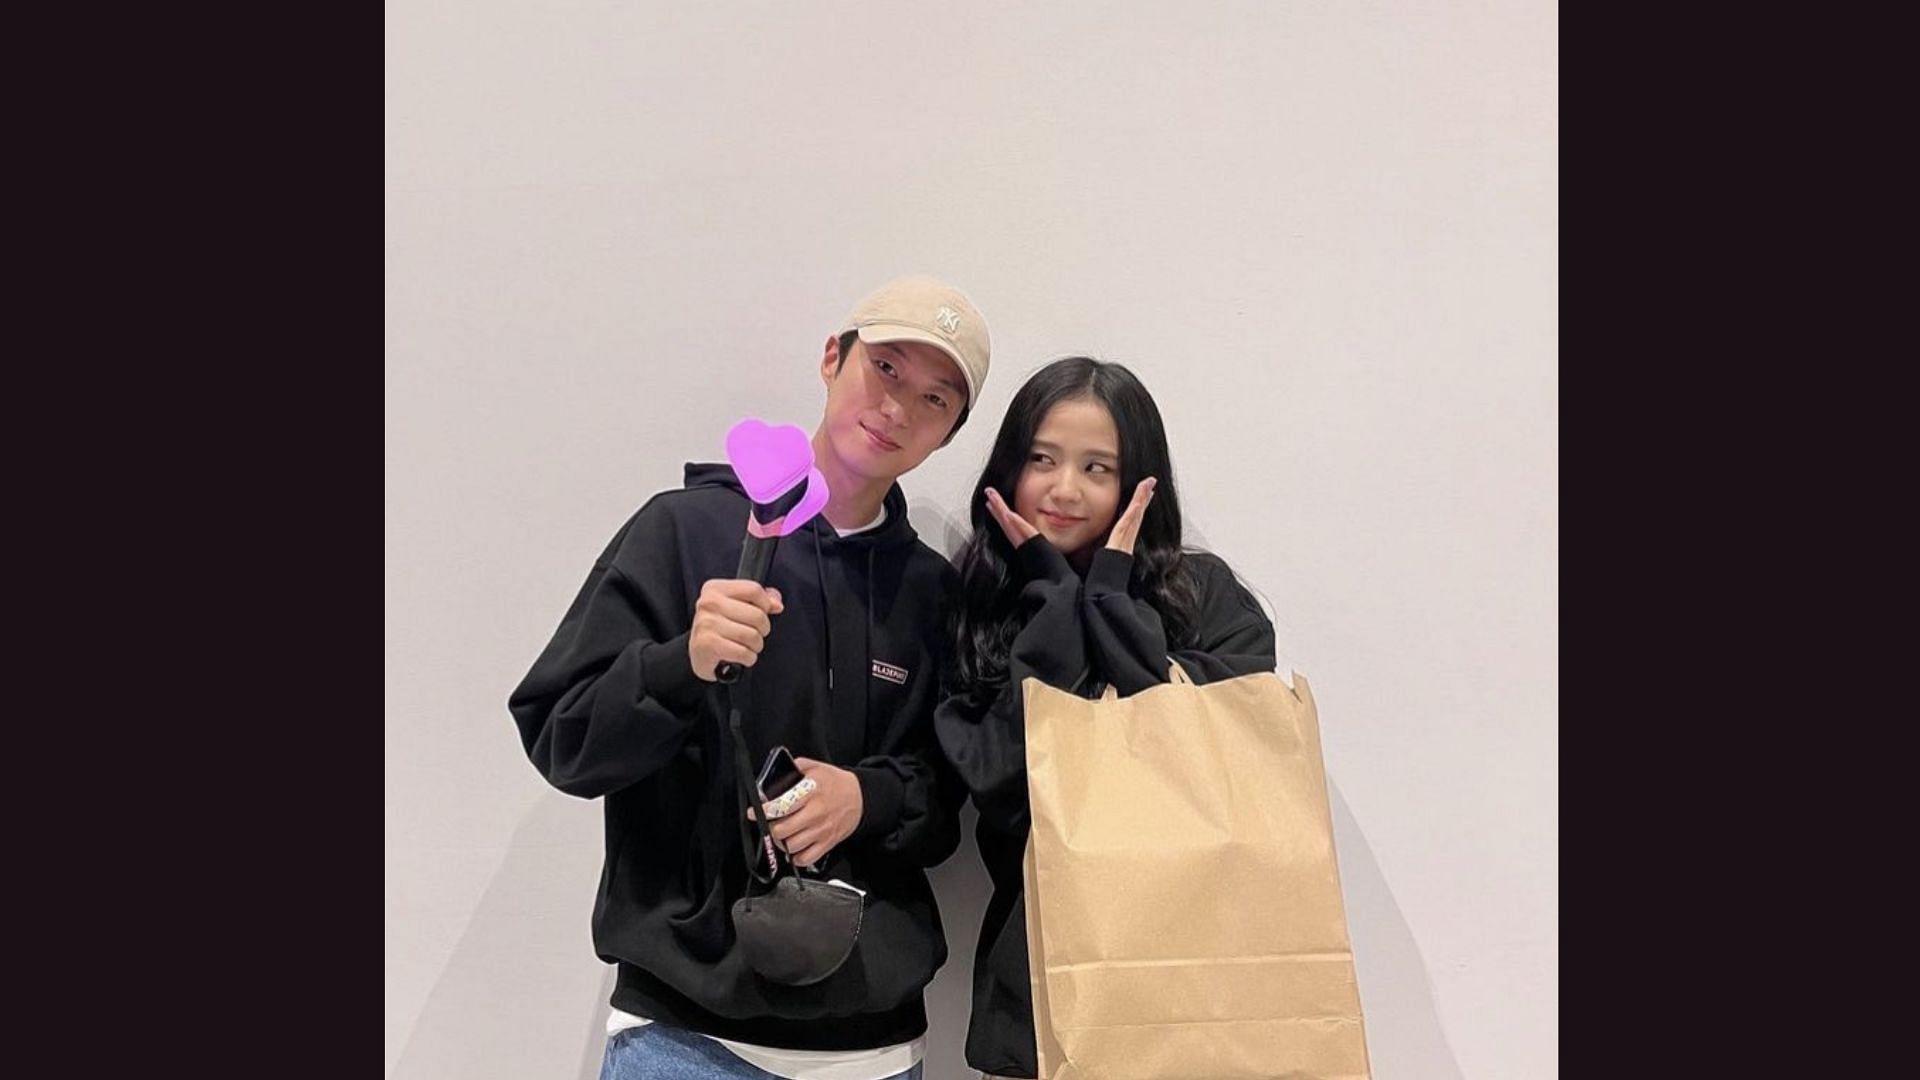 Almost all Snowdrop actors were present at the concert to show Jisoo support, including actor Ahn Dong-goo who was also decked out in BLACKPINK merch (Image via Twitter/janydior)